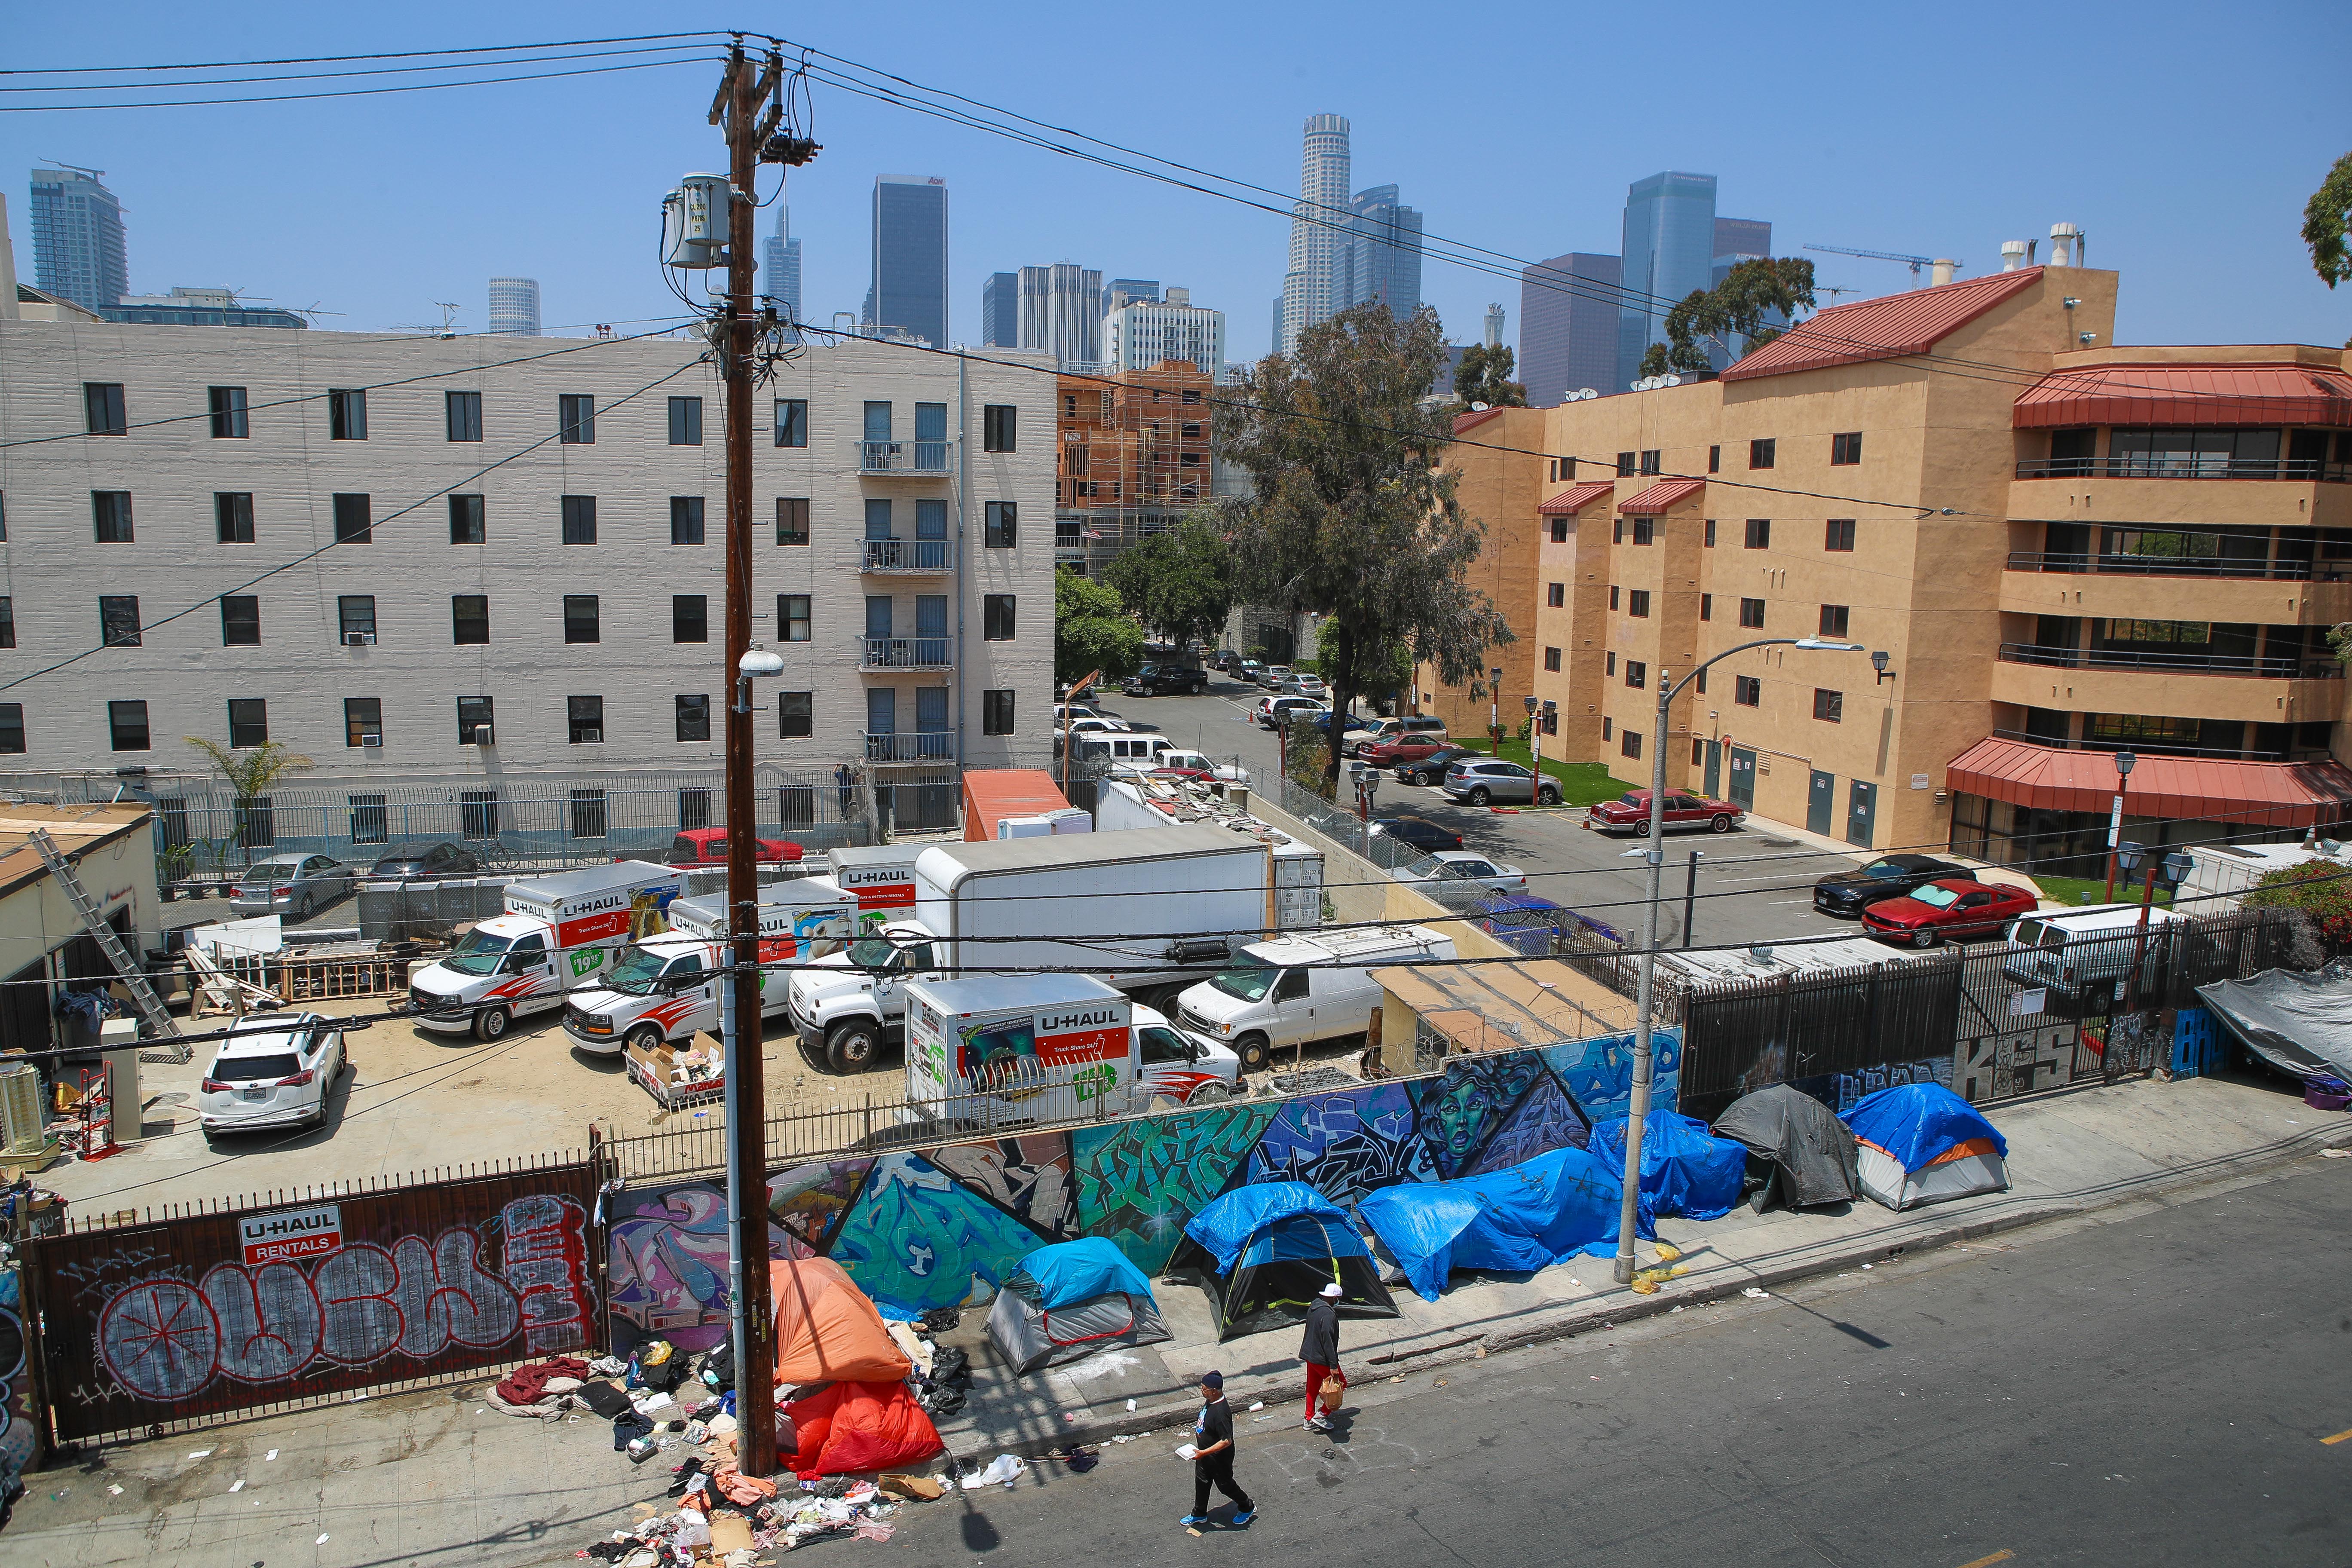 British artist Chemical X unveils his controversial "Skid Rodeo Drive" Initiative in the homeless ghetto of Skid Row on May 30, 2019 in Los Angeles, California. (Photo by Ari Perilstein/Getty Images for Chemical X)